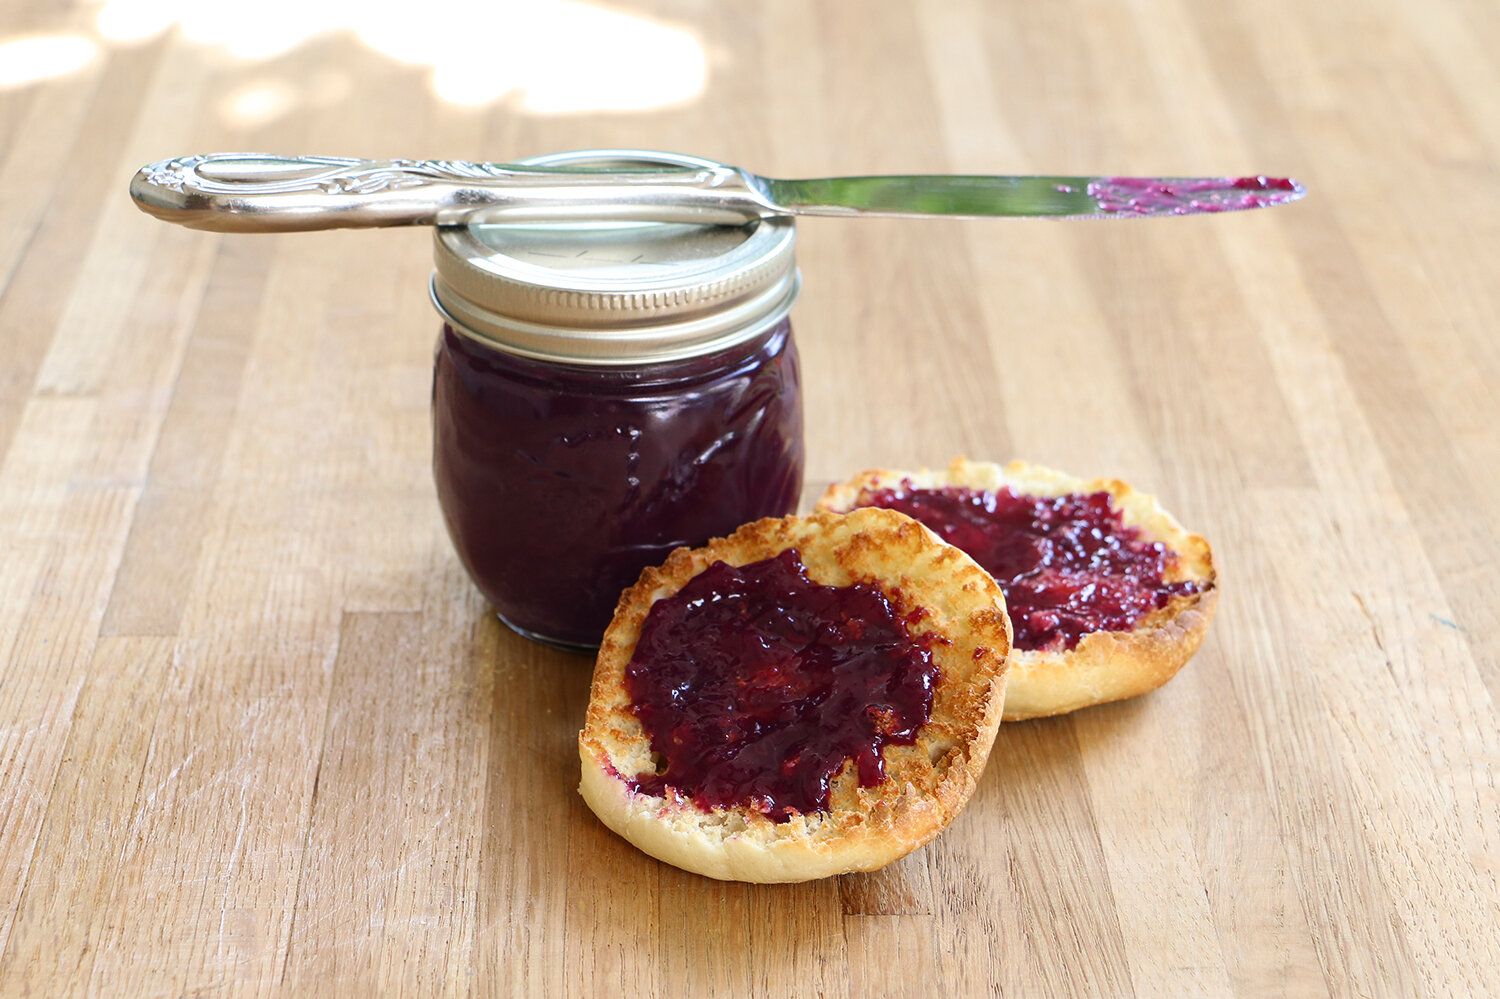 Homemade Grape Jelly Recipe - Made With Fresh Grapes or Juice